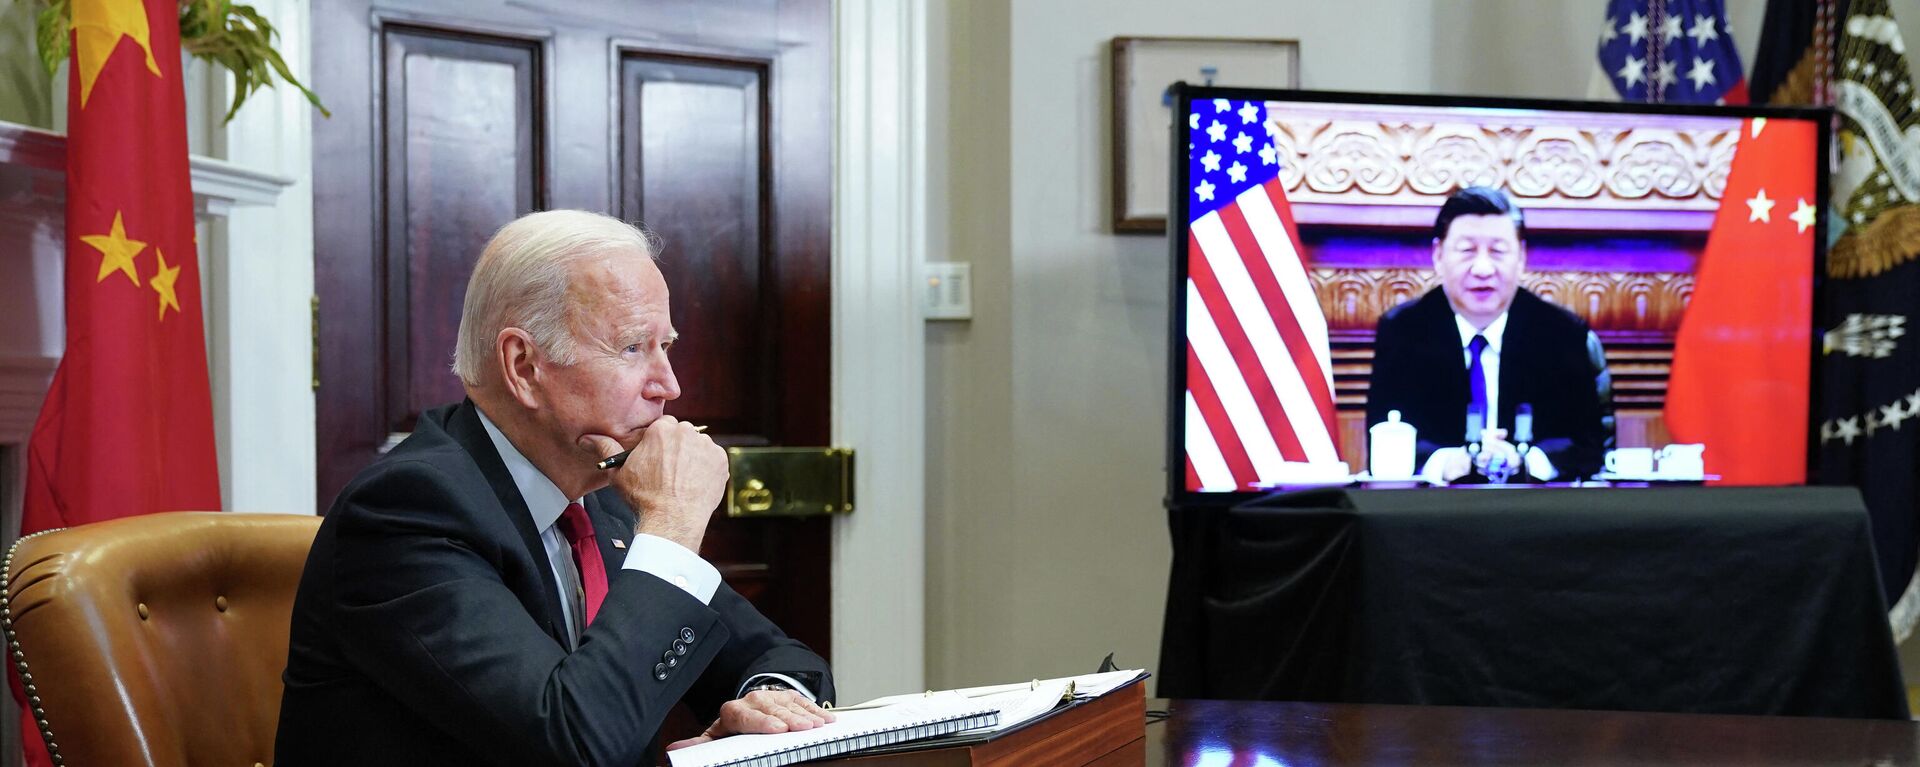 US President Joe Biden meets with China's President Xi Jinping during a virtual summit from the Roosevelt Room of the White House in Washington, DC, November 15, 2021.  - Sputnik International, 1920, 17.11.2021